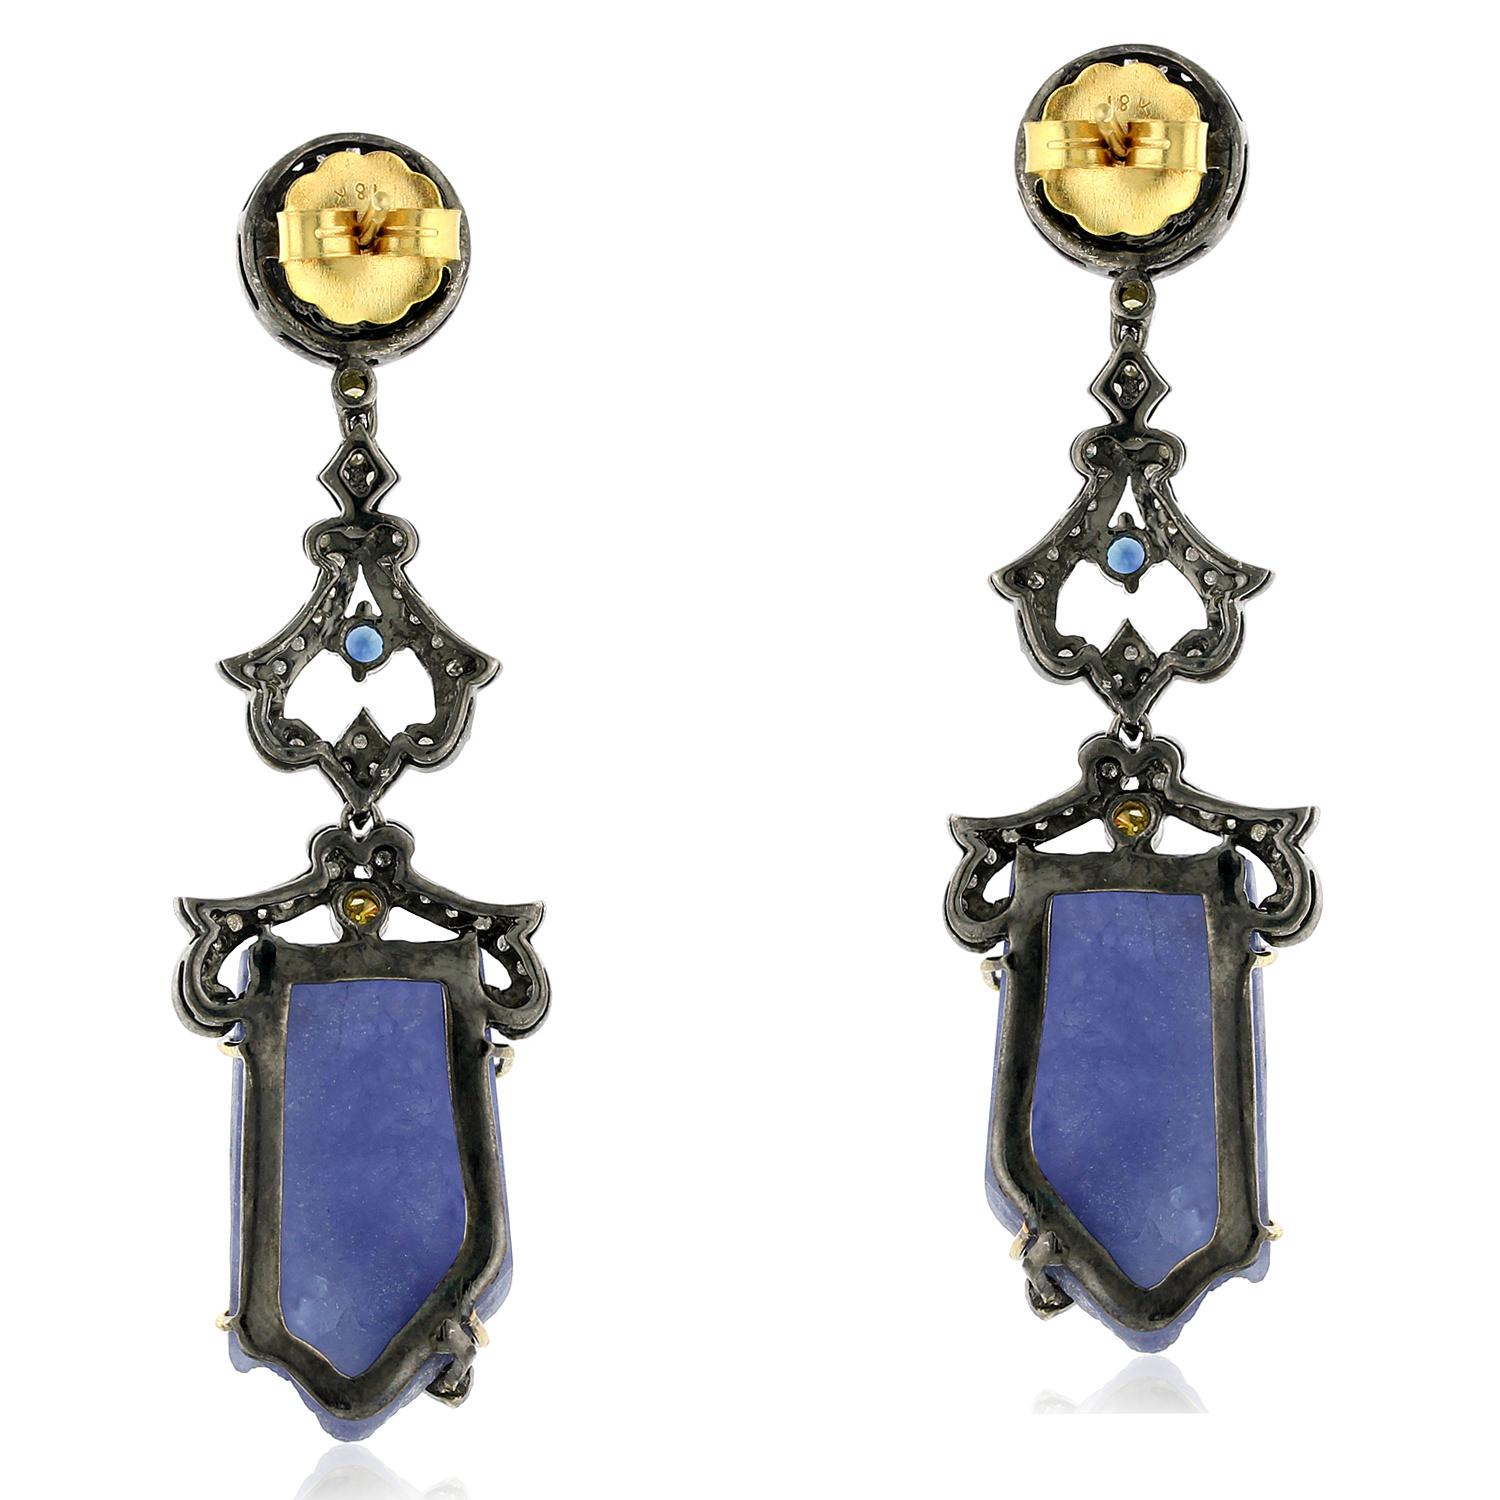 These stunning tanzanite dangle earrings are a true work of art. Handcrafted with the finest materials, these earrings feature a pair of sparkling tanzanite gemstones and shimmering sapphires. The earrings are finished with 18k gold and silver,